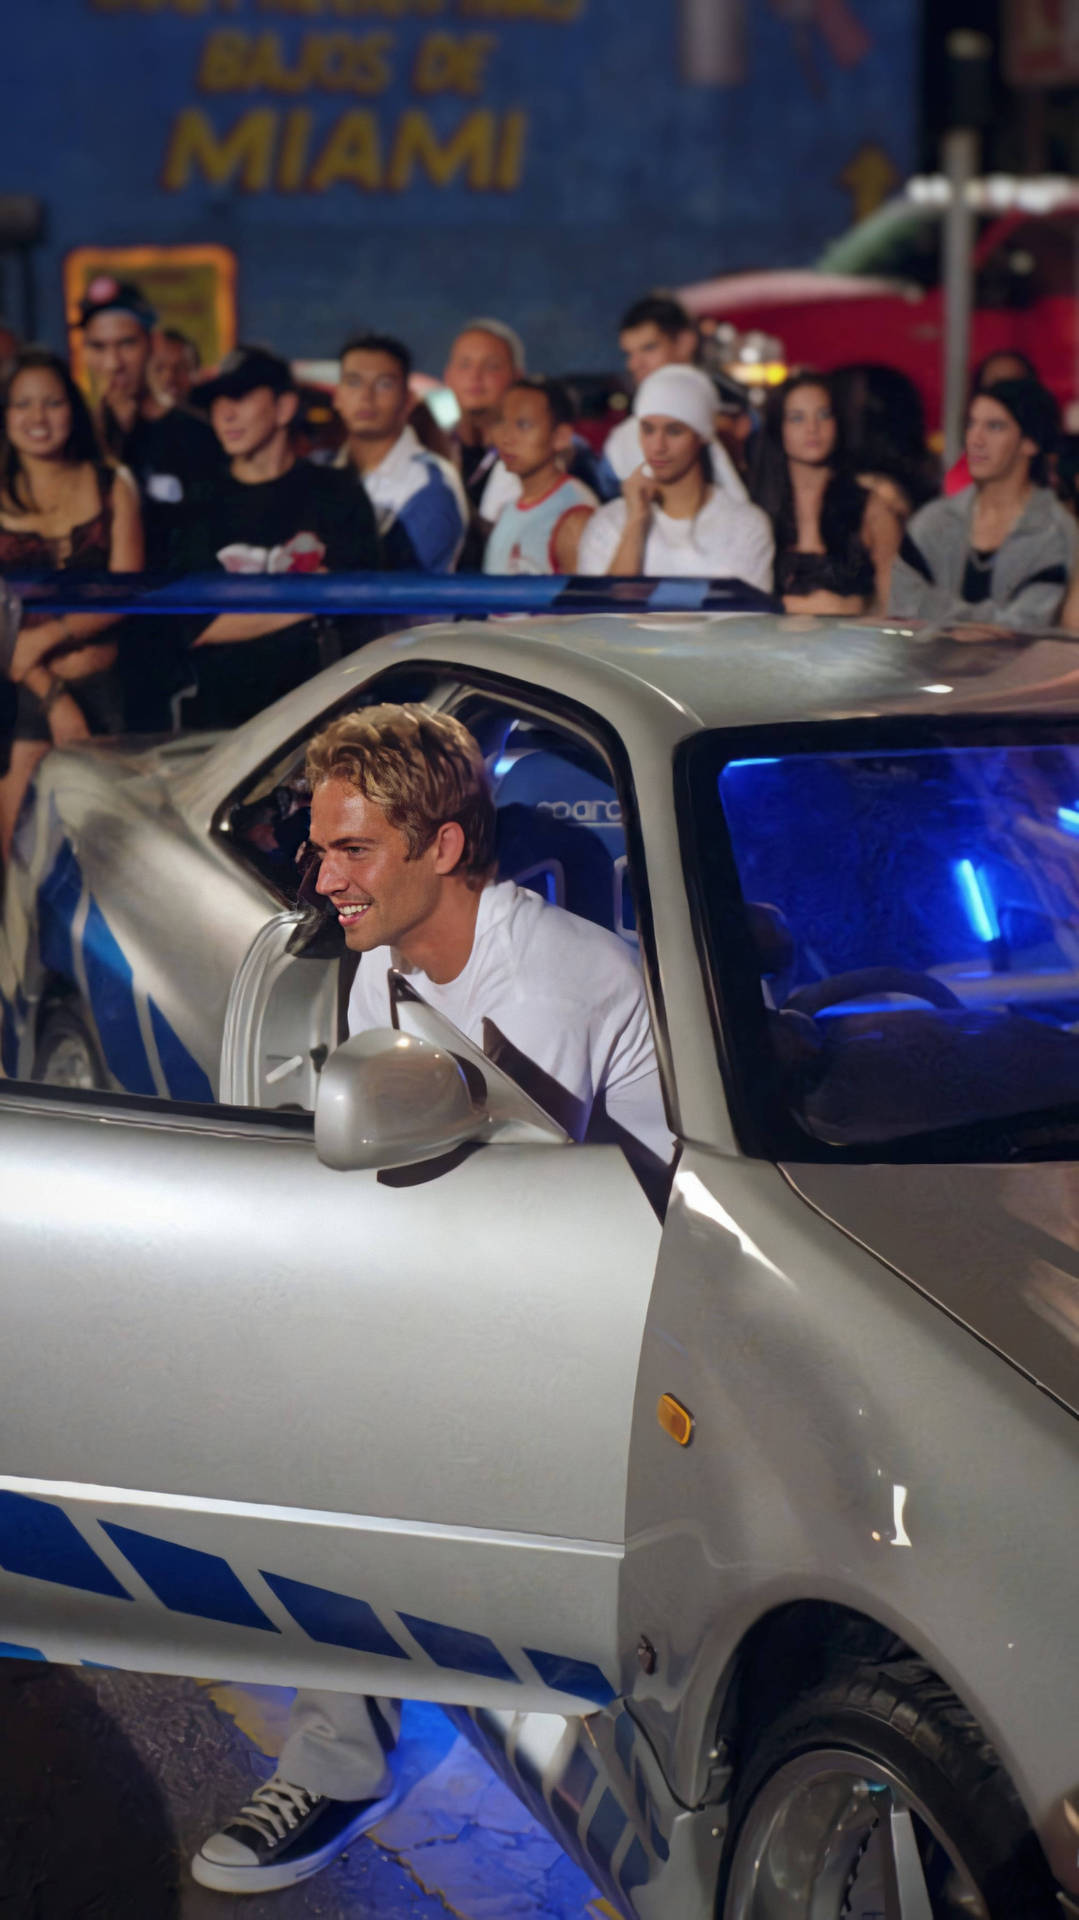 Paul Walker driving his car in an iconic scene from the Fast and Furious franchise Wallpaper